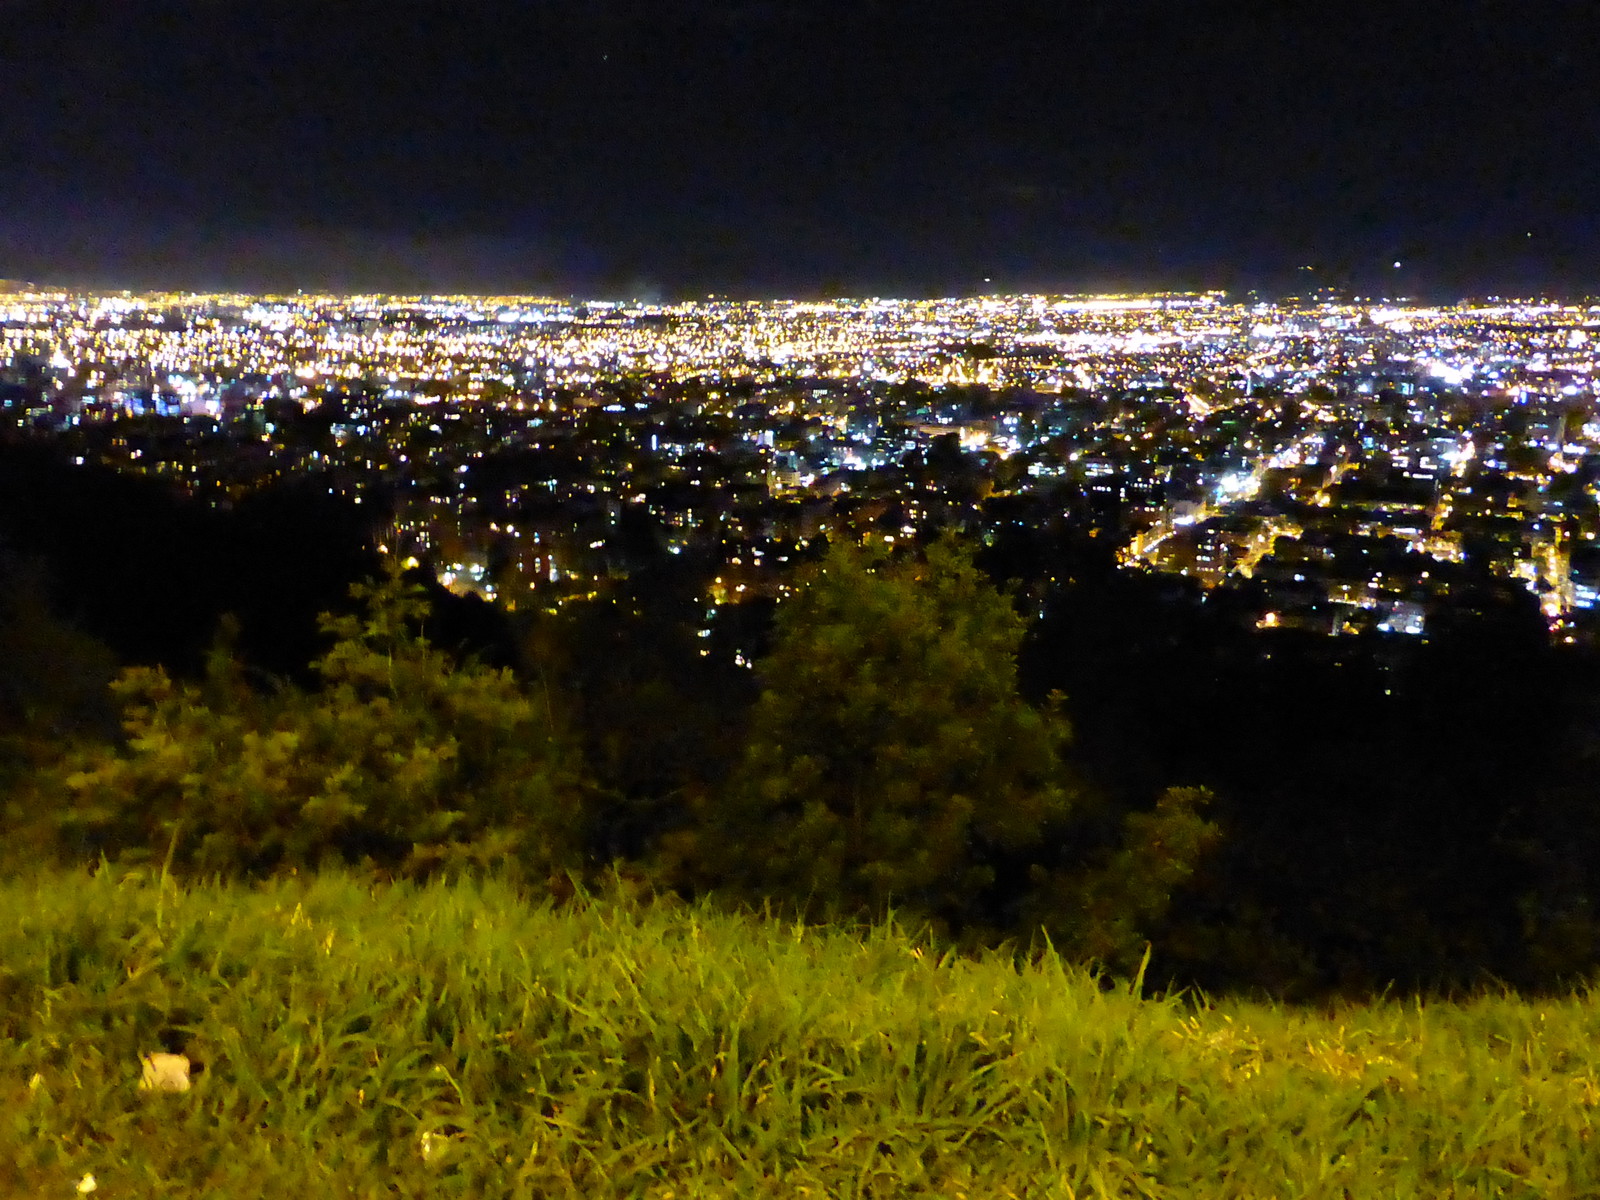 The night view over the city from the road to La Calera